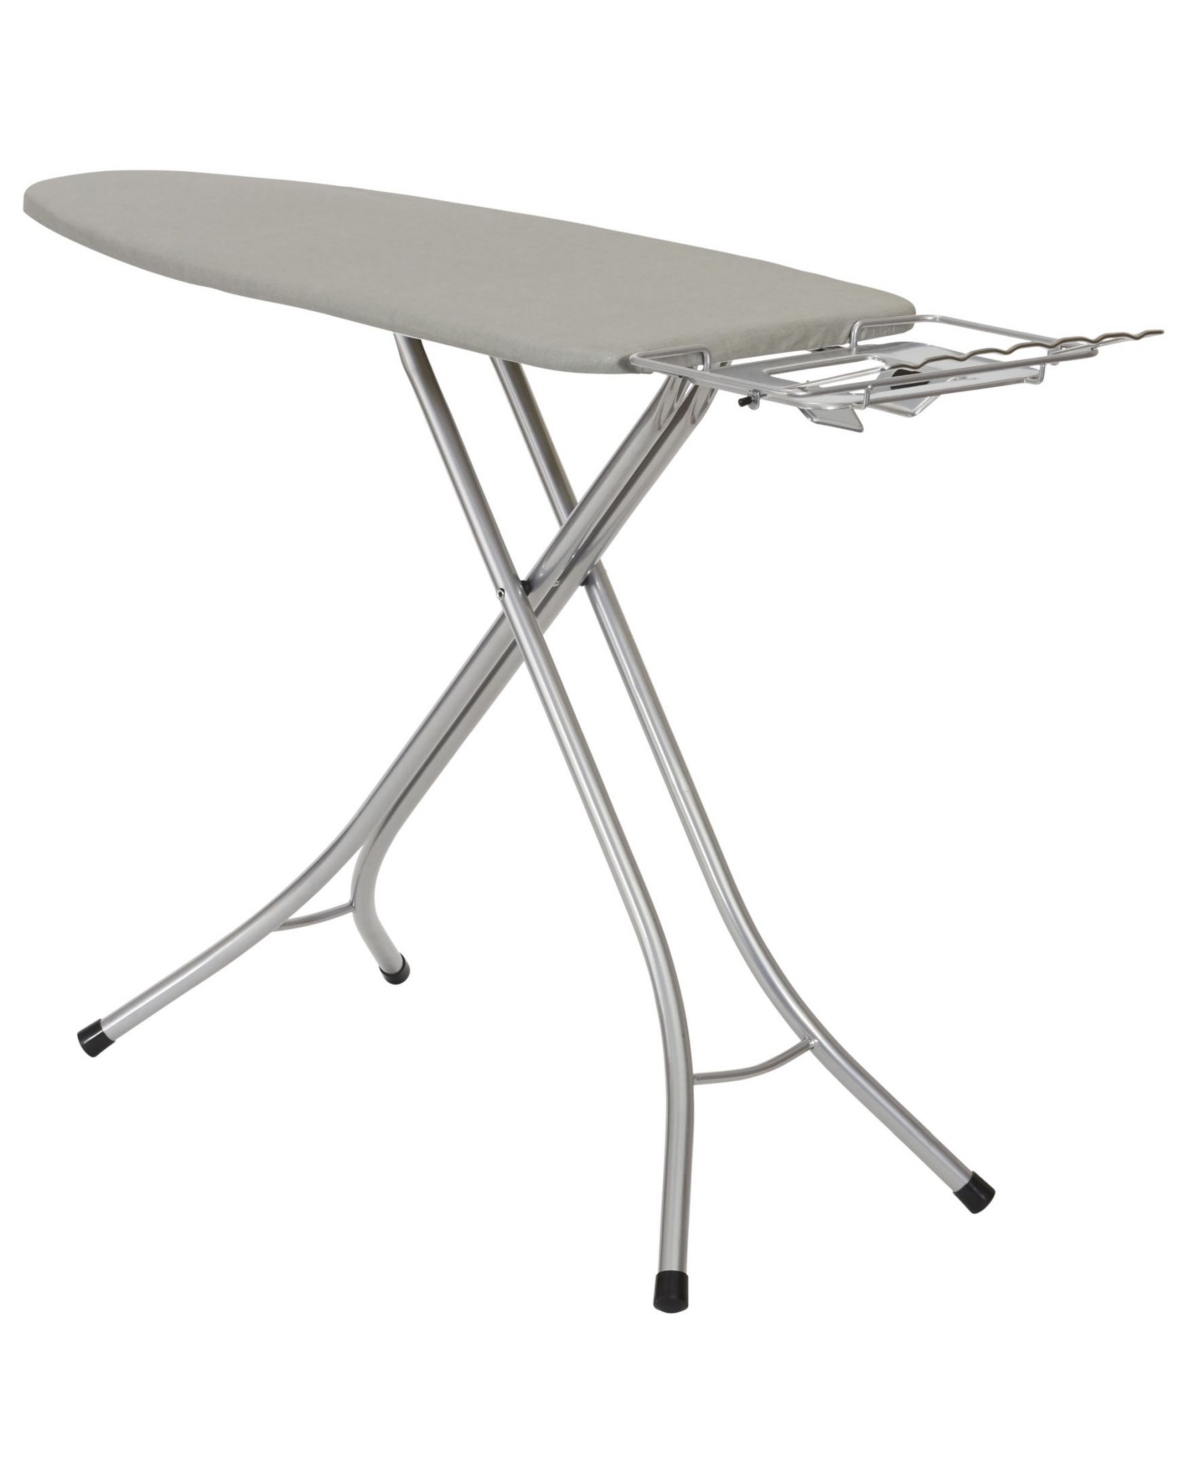 Household Essential Wide Top Ironing Board, 4-Legs - Silver